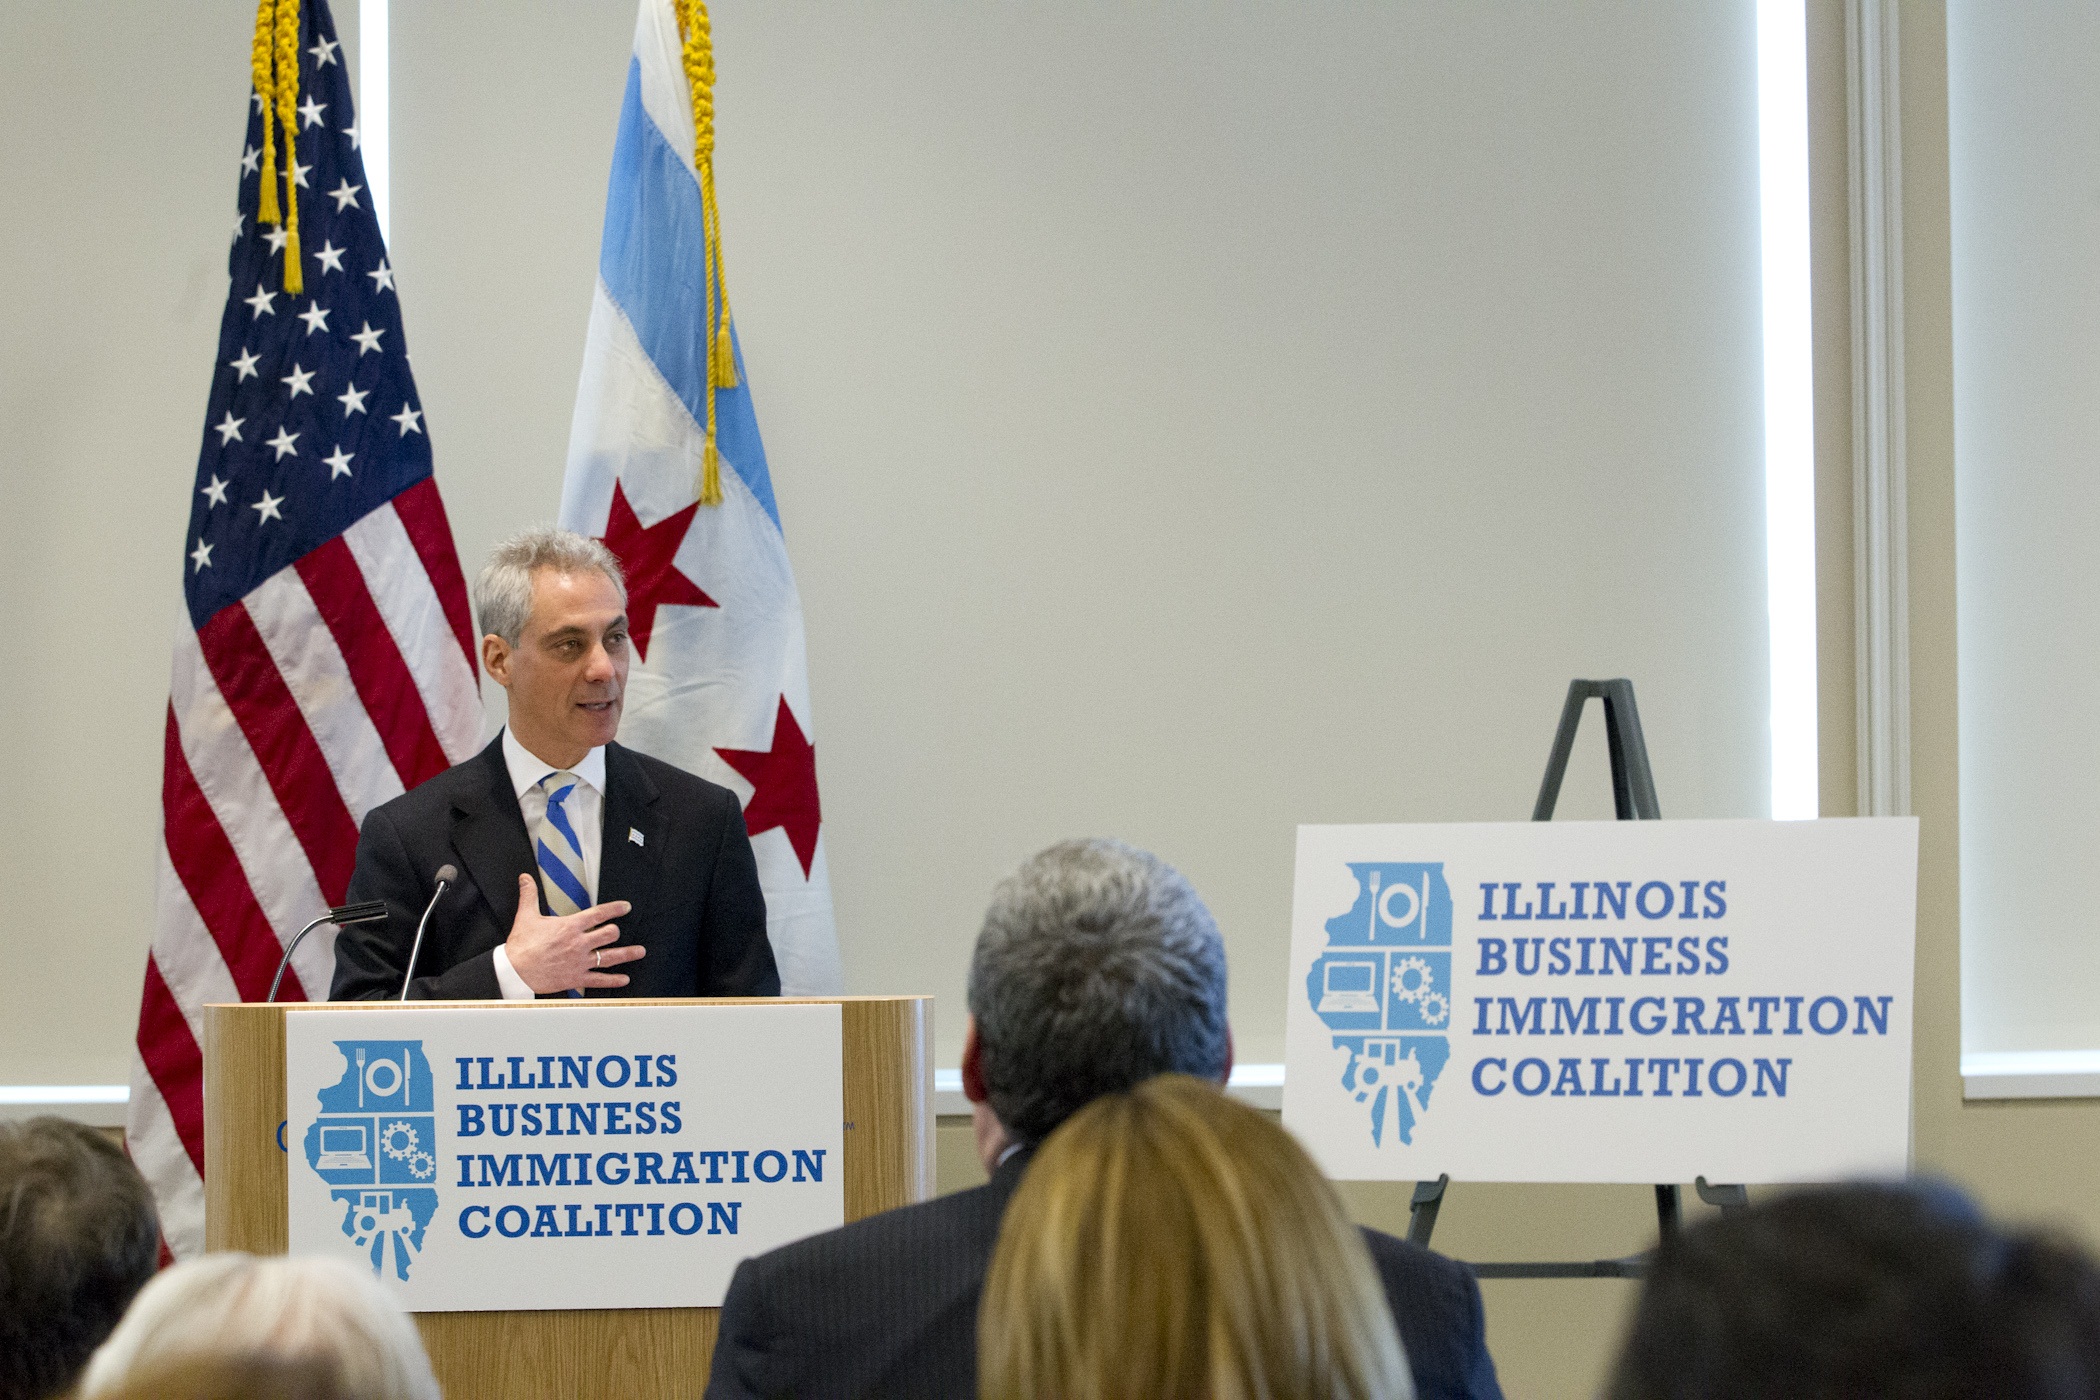 Mayor Emanuel Joins Caterpillar Chairman and CEO Doug Oberhelman and Other Illinois Business and Civic Leaders to Launch the Illinois Business Immigration Coalition